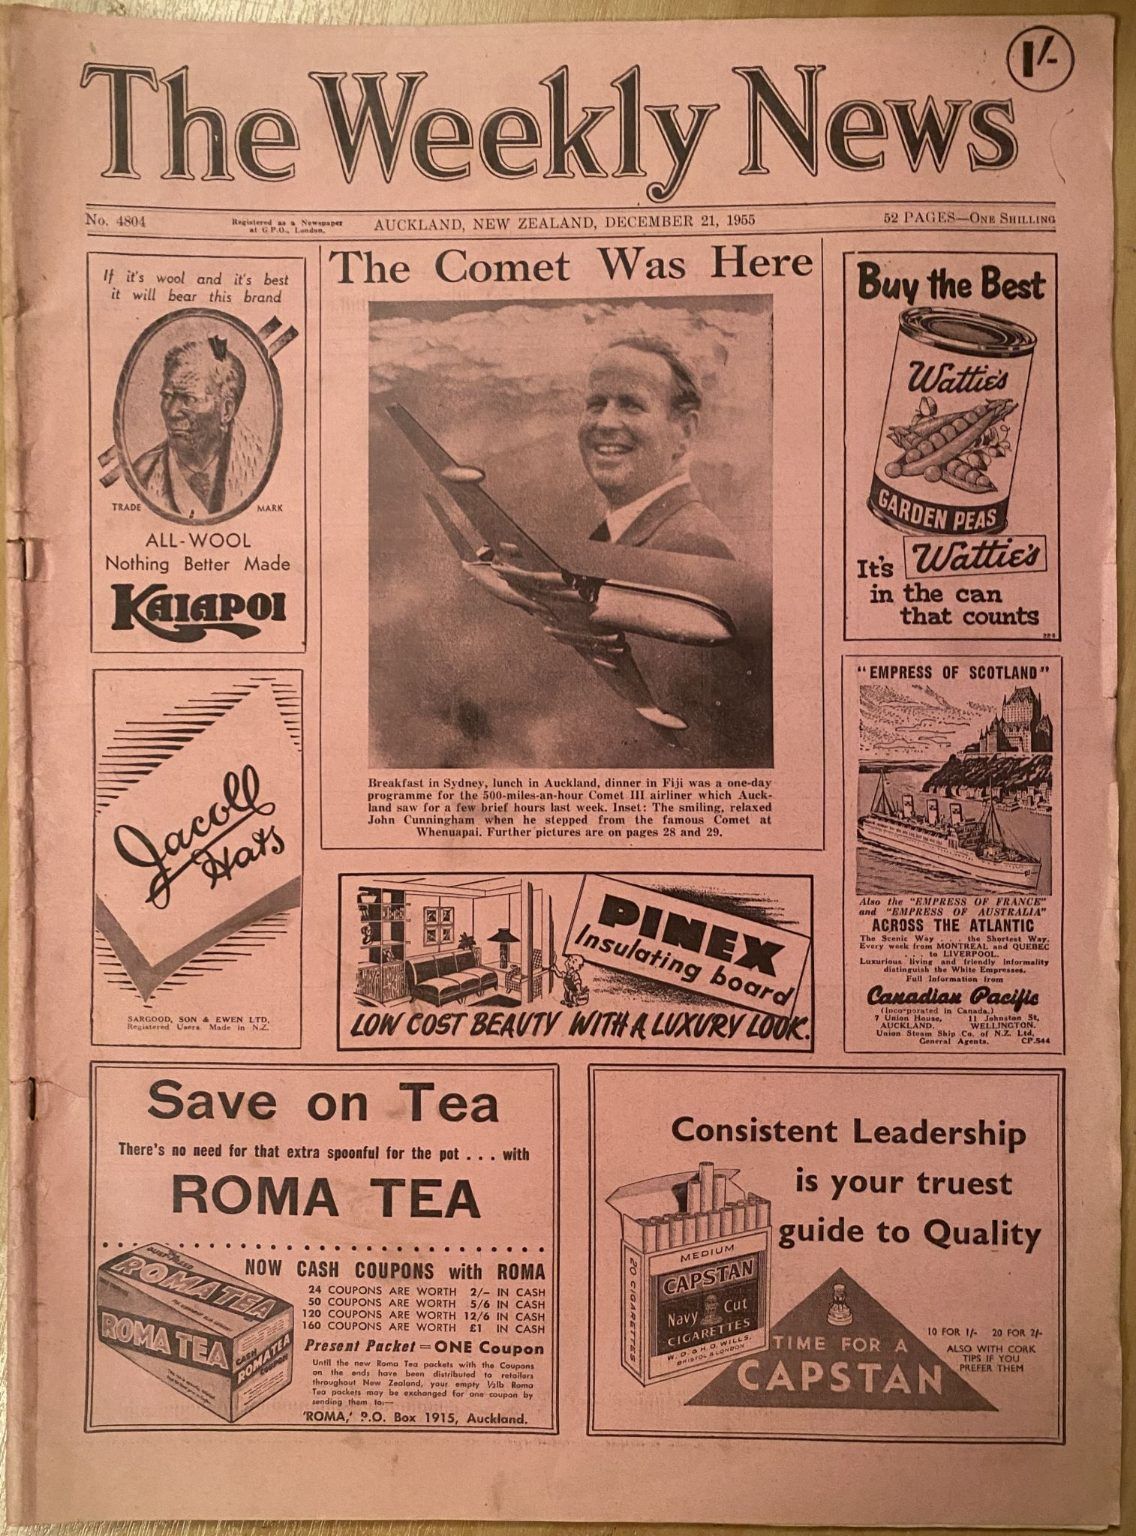 OLD NEWSPAPER: The Weekly News - No. 4804, 21 December 1955